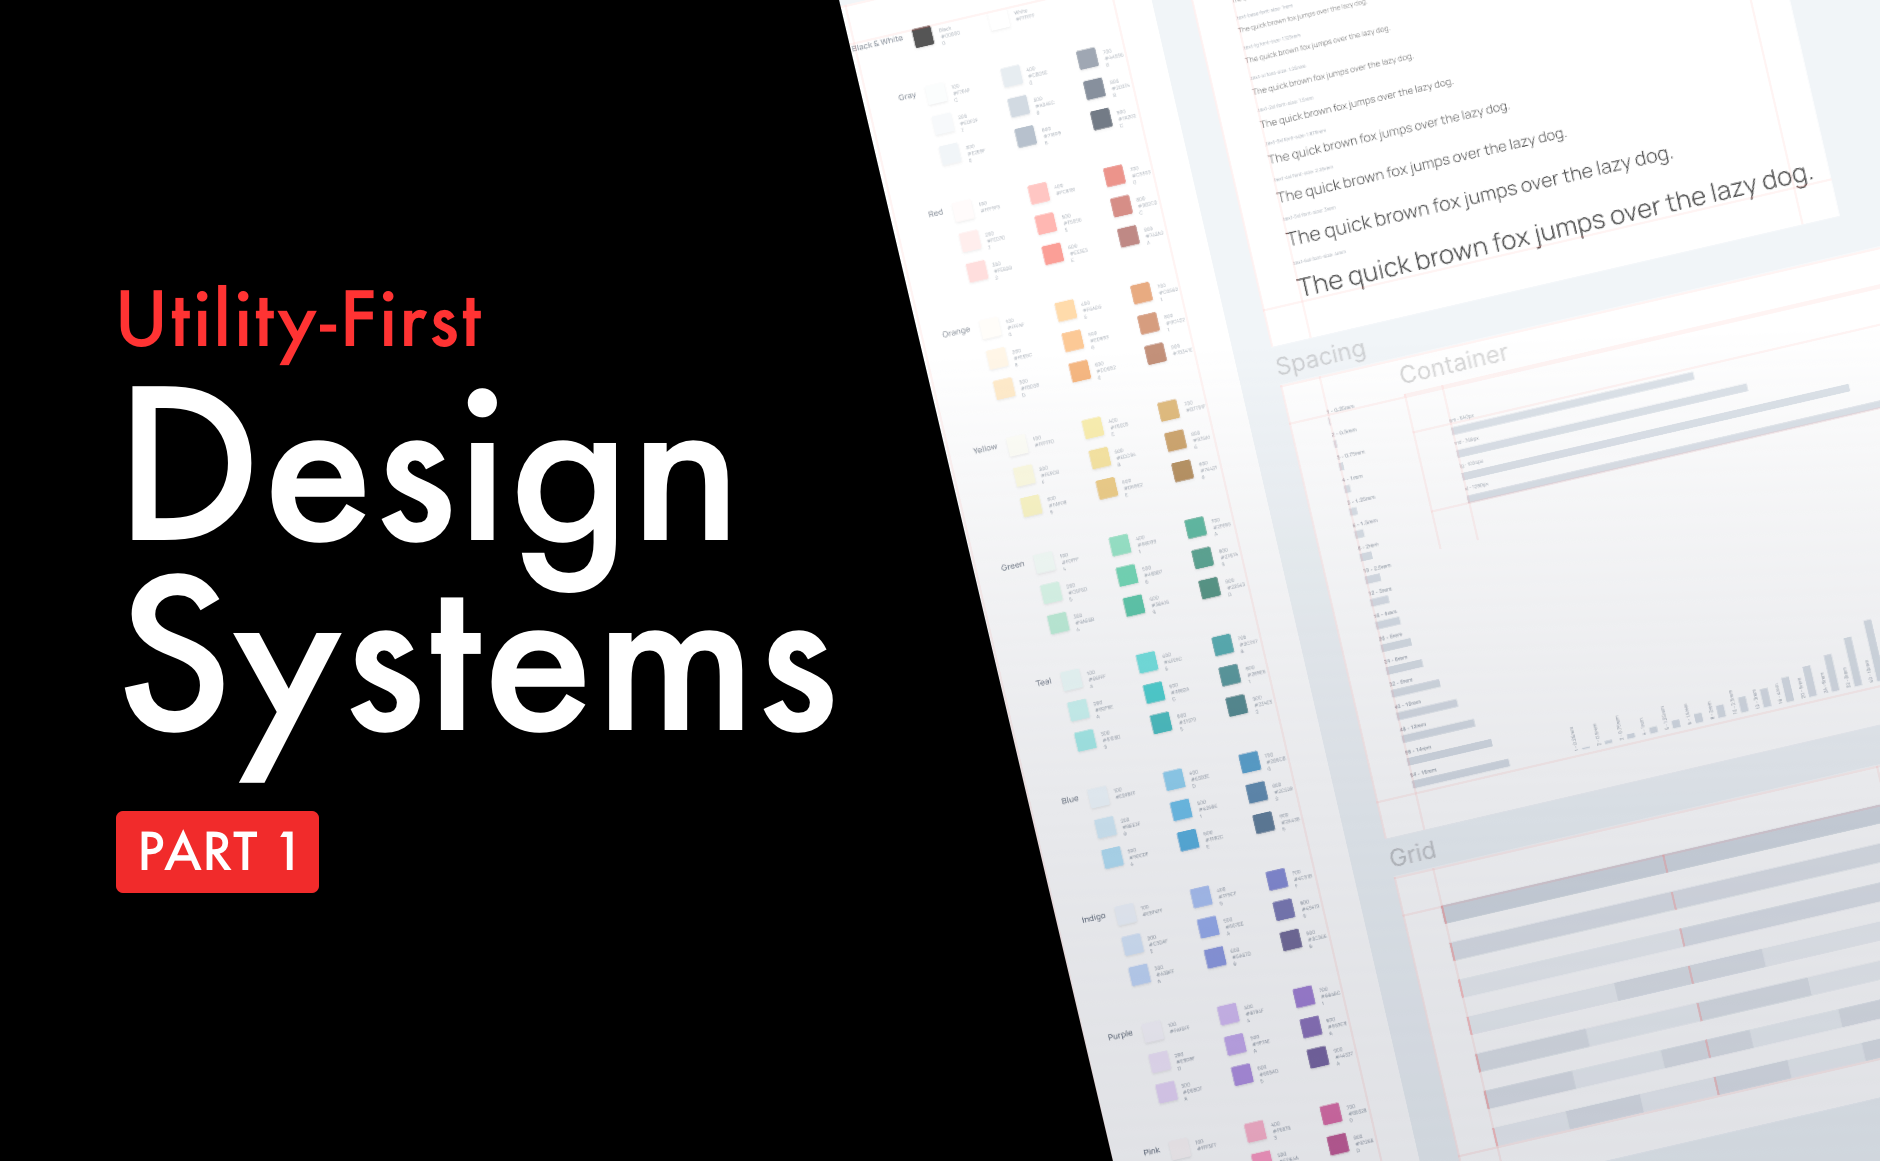 Building "utility-first" design systems